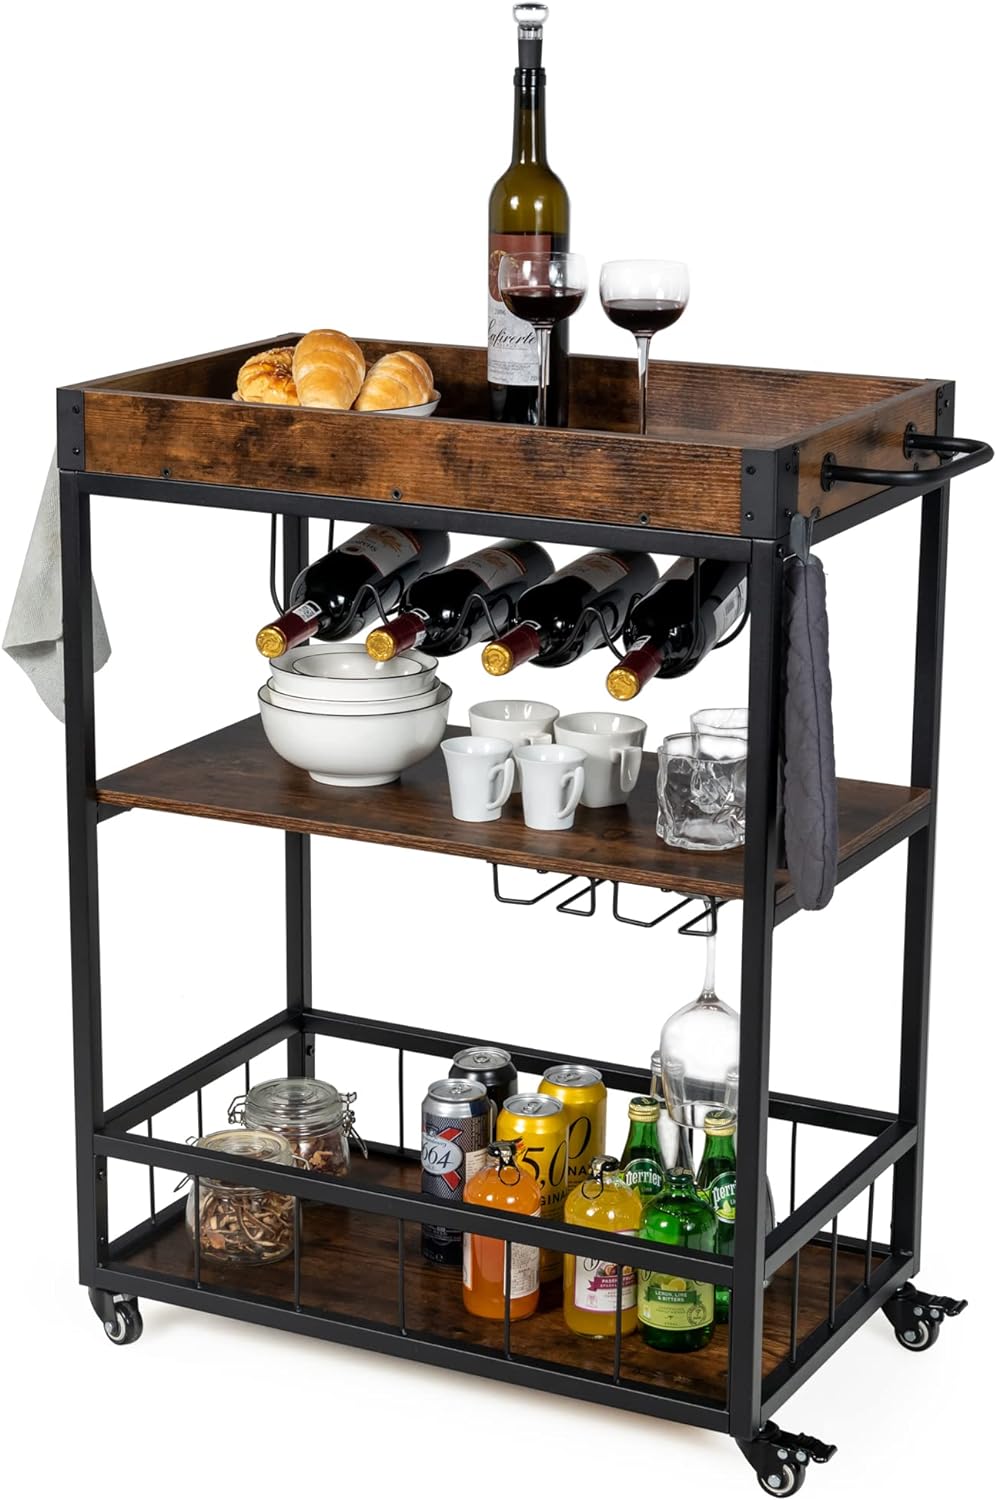 Amazing bar cart, better than I expected for the price, honestly.It match with my floor and its easy to assemble. I have to say its unbelievable at this price!